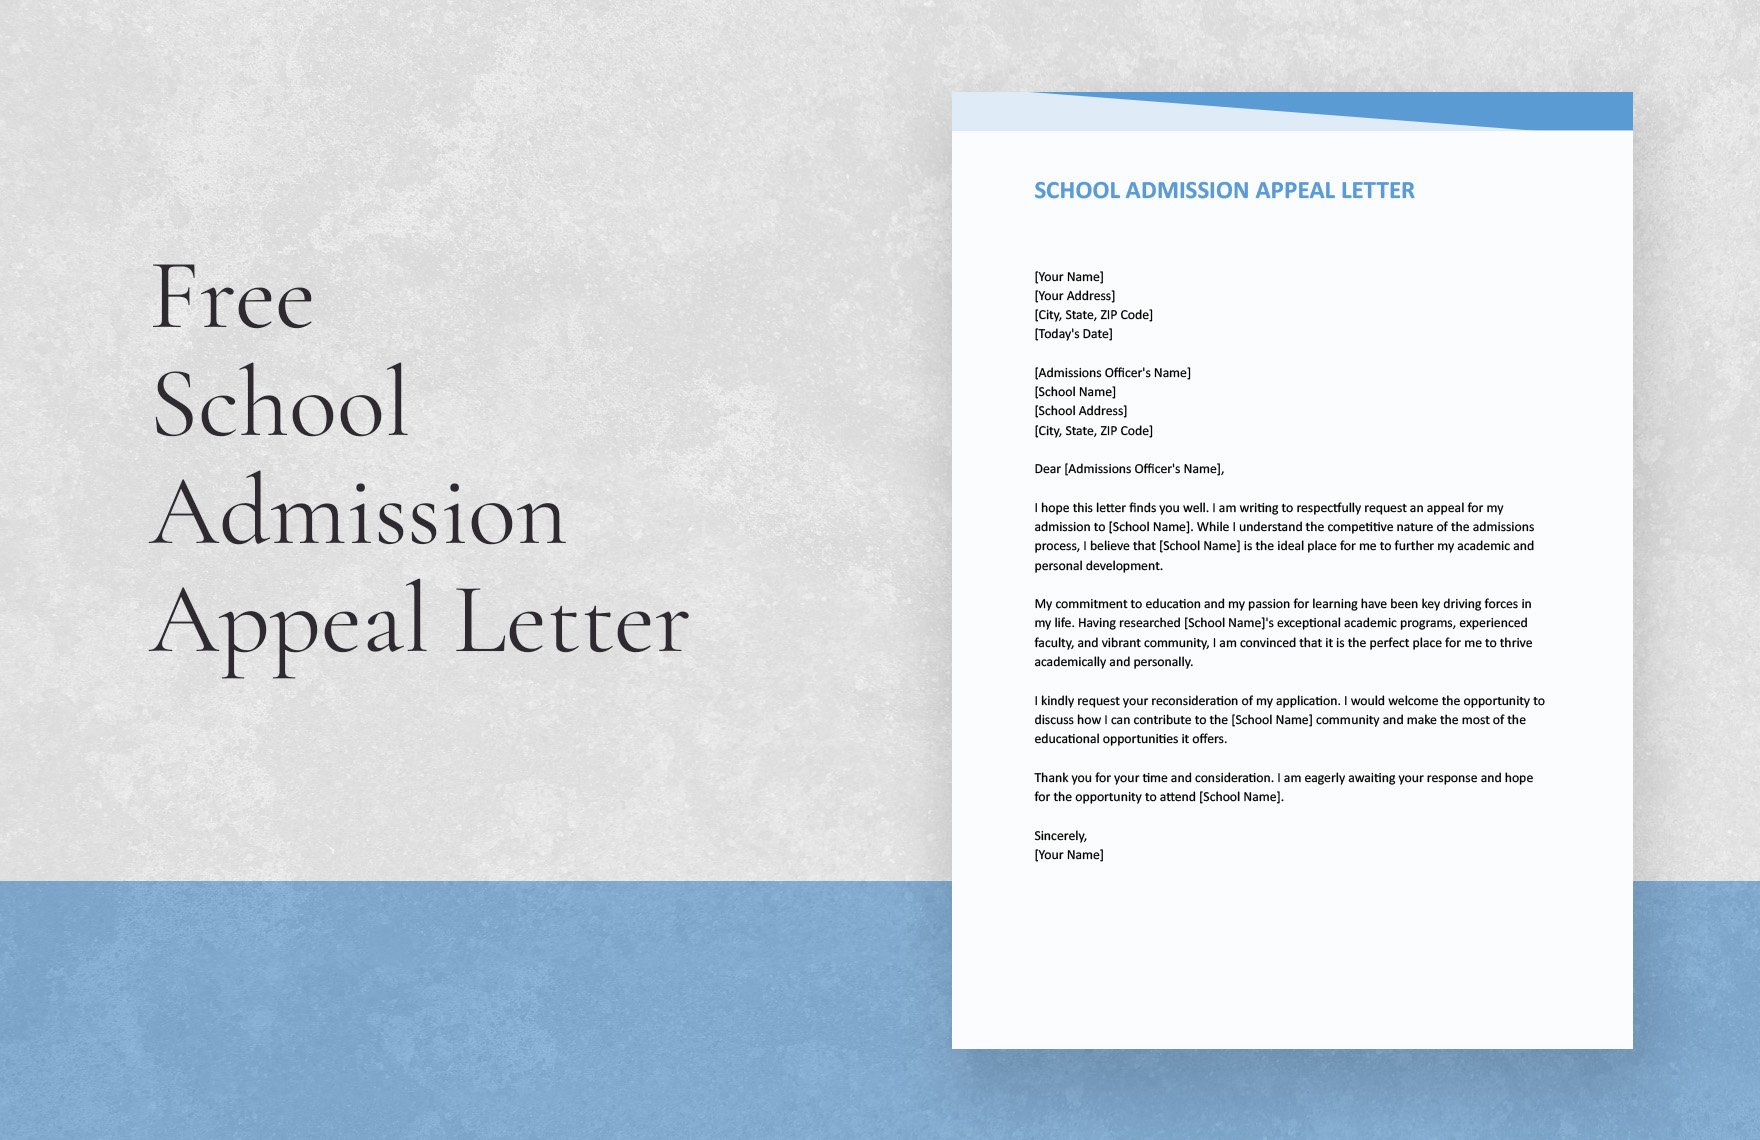 School Admission Appeal Letter in Word, Google Docs